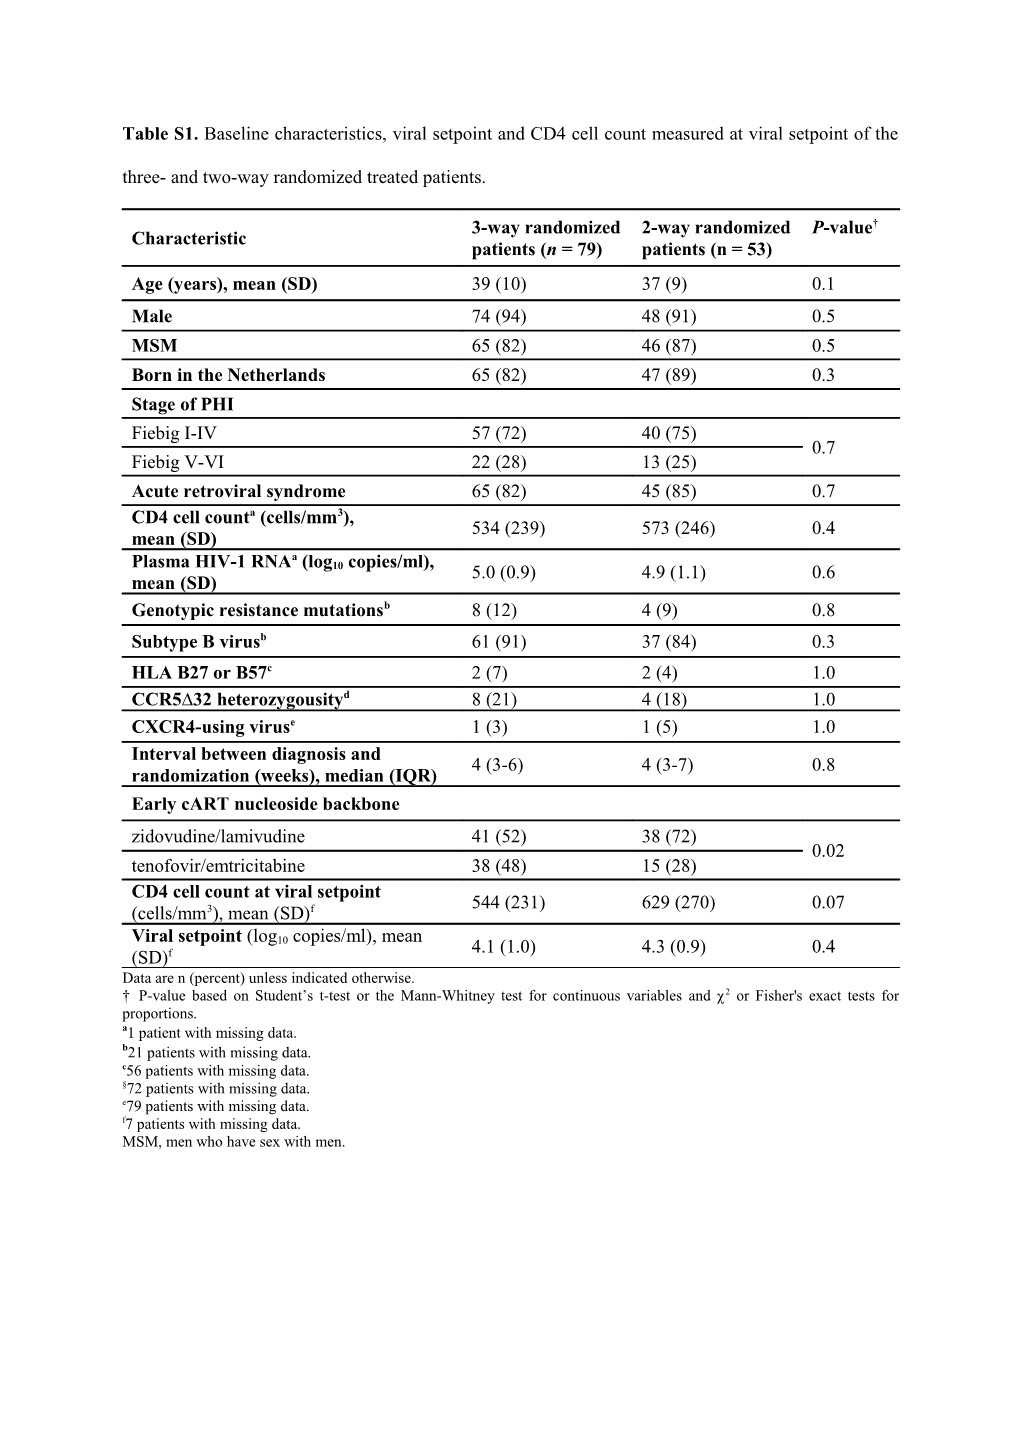 Supplementary Table Baseline Characteristics, Viral Setpoint and CD4 Cell Count Measured